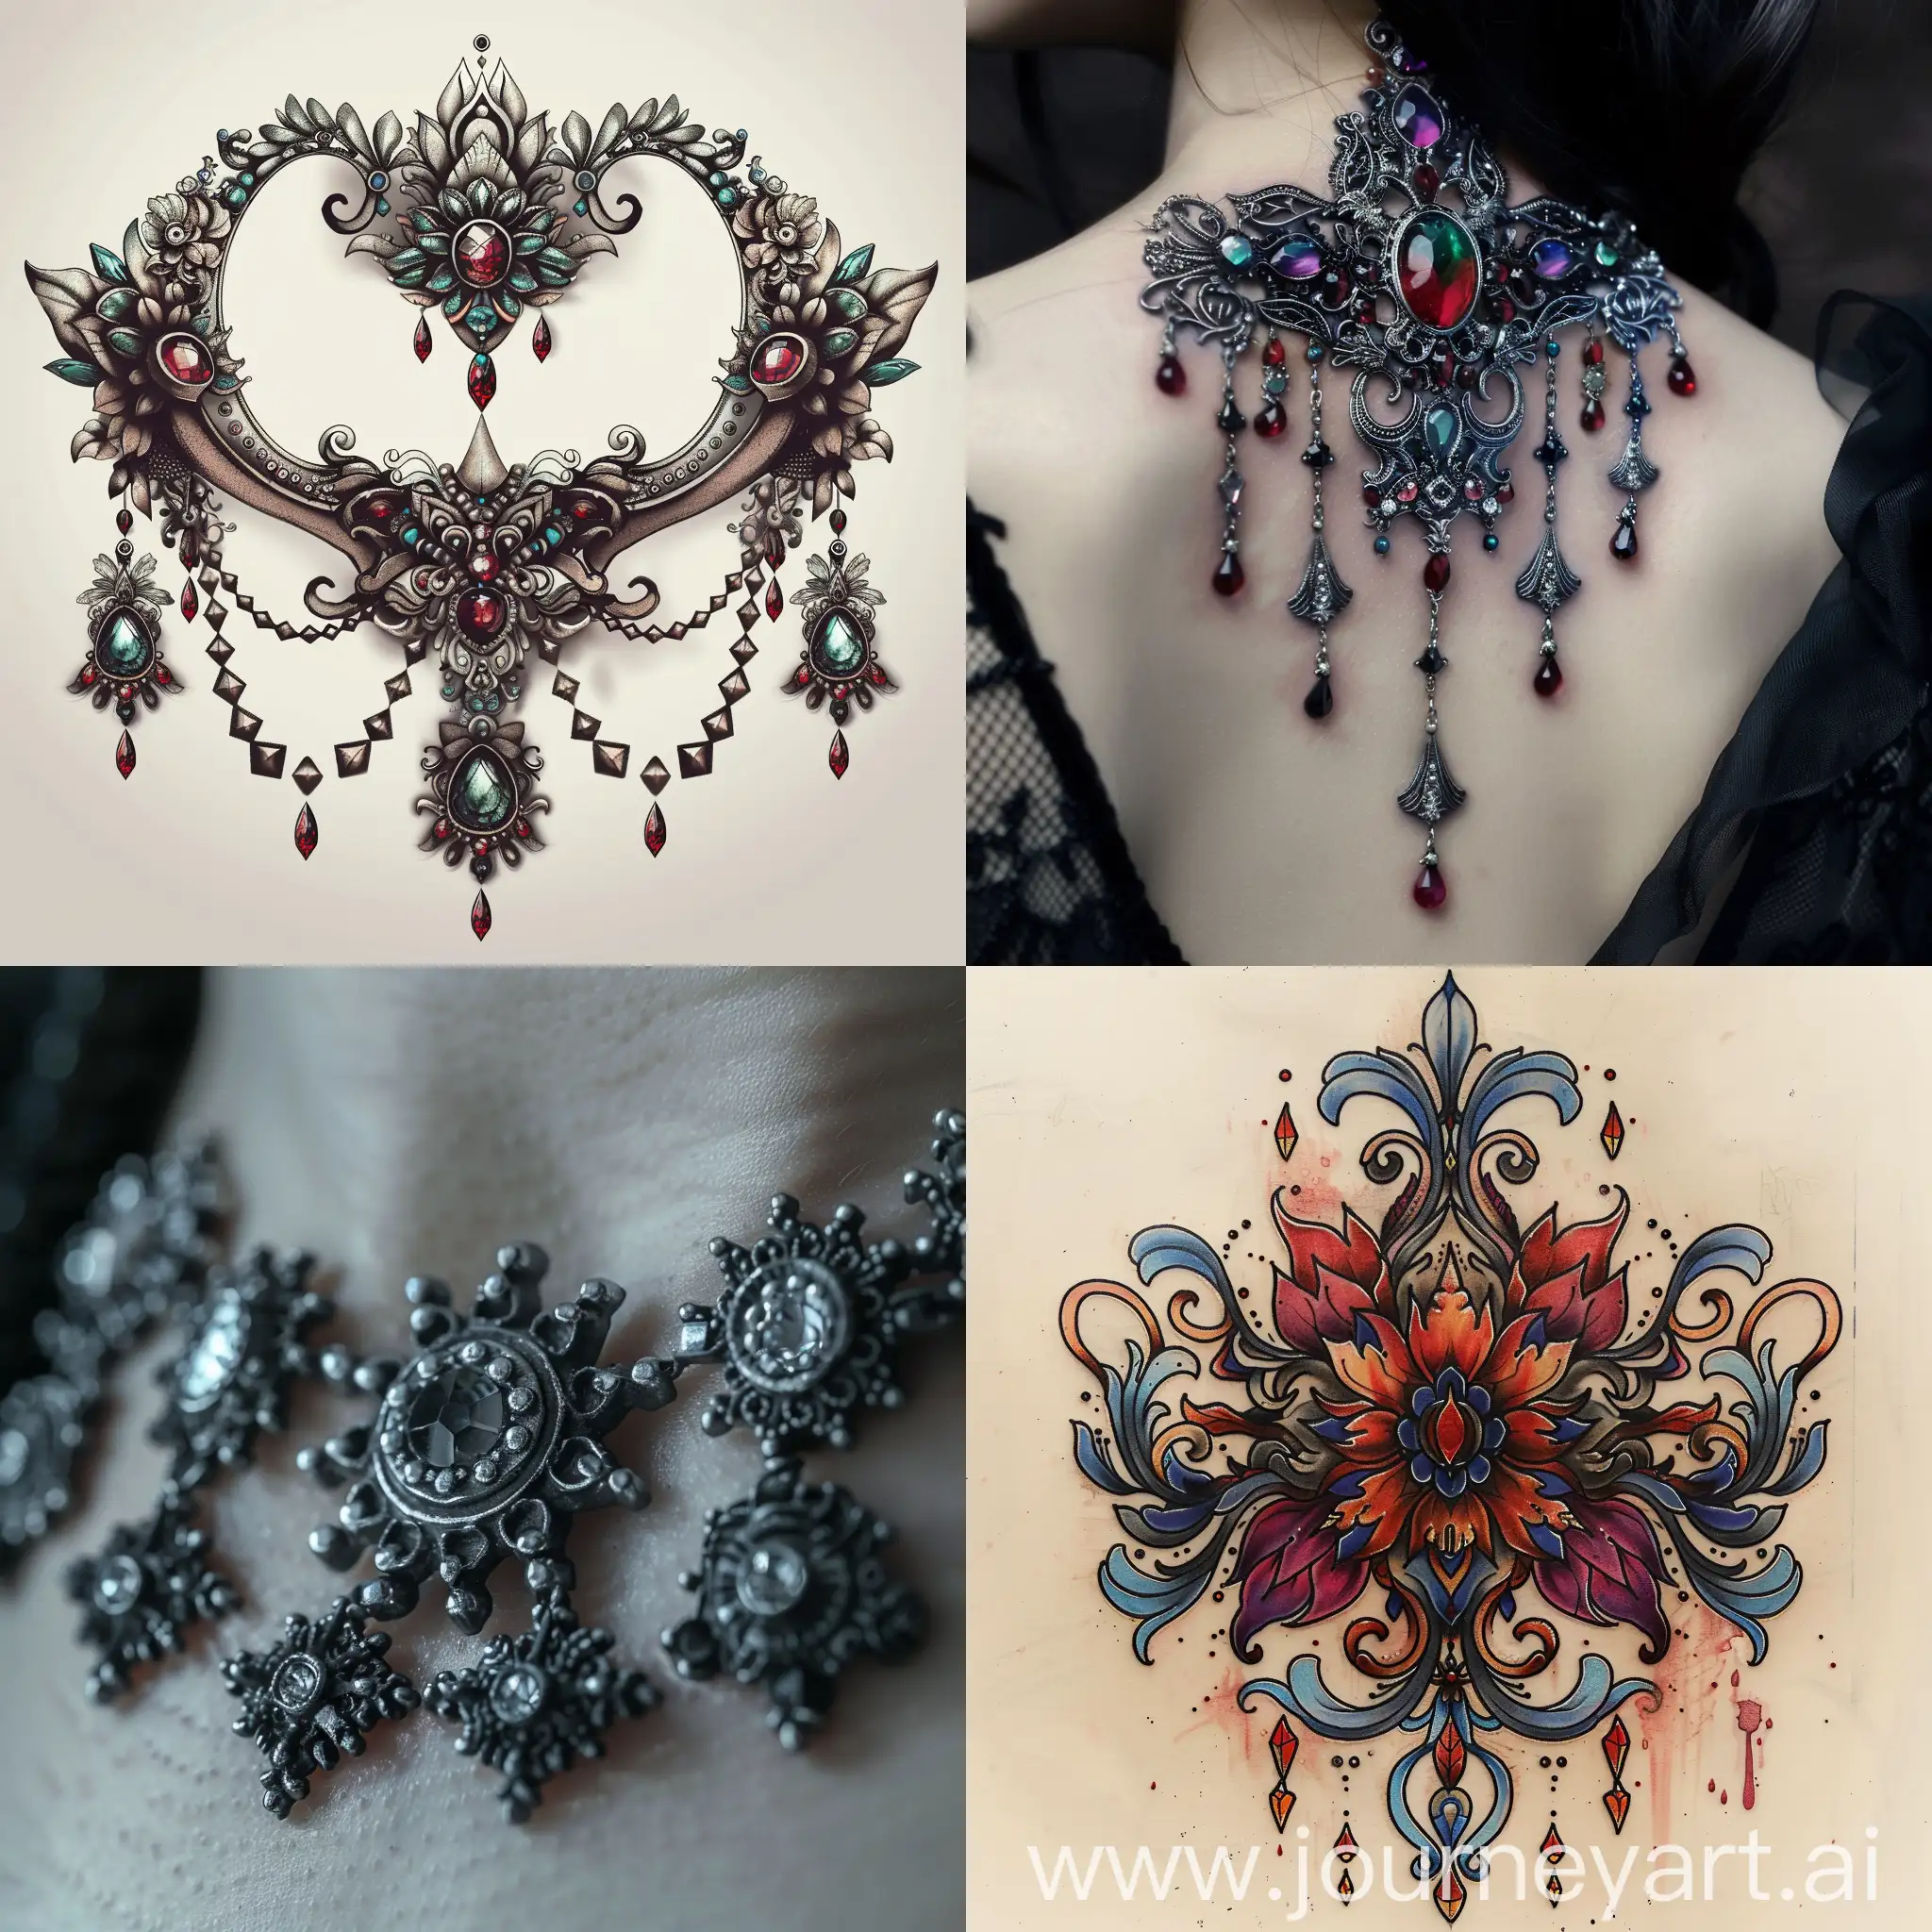 Intricate-Piercing-and-Tattoo-Decoration-Against-Dark-Background